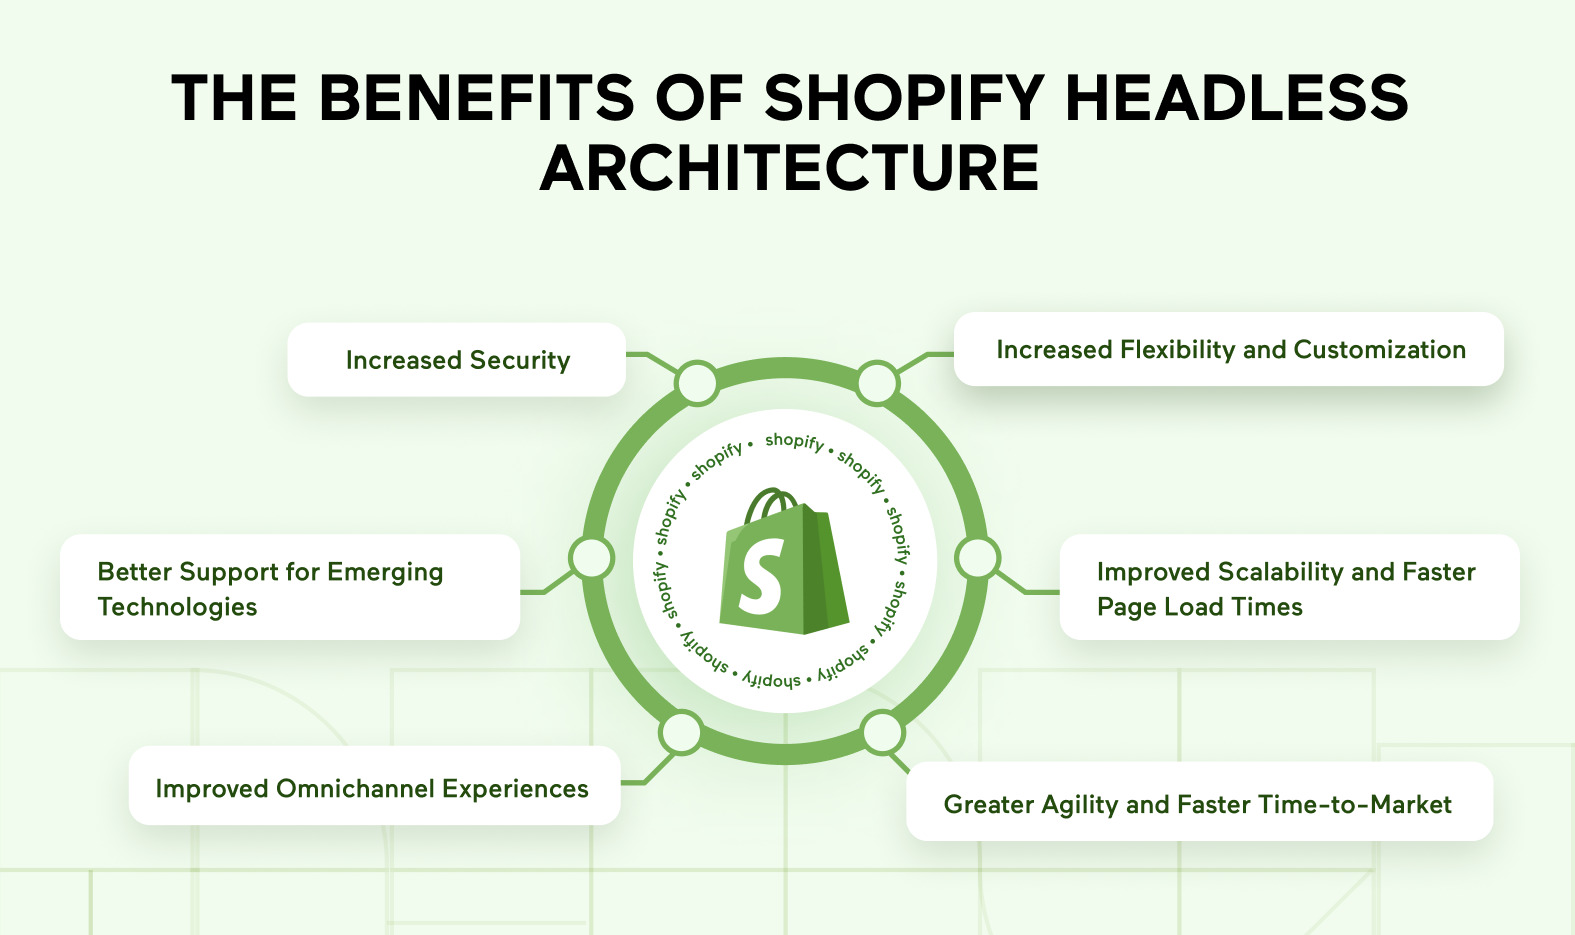 Choosing the right platform for headless commerce is critical to maximizing the benefits of this innovative approach. Shopify distinguishes itself as a top choice due to its comprehensive capabilities, dependable infrastructure, and extensive ecosystem. Shopify offers a comprehensive suite of tools and services designed to implement headless commerce, simplify the process and enhance the overall performance of online stores. Leveraging Shopify’s powerful APIs and scalable infrastructure means that businesses can create custom, high-performing ecommerce experiences that drive growth and customer satisfaction.